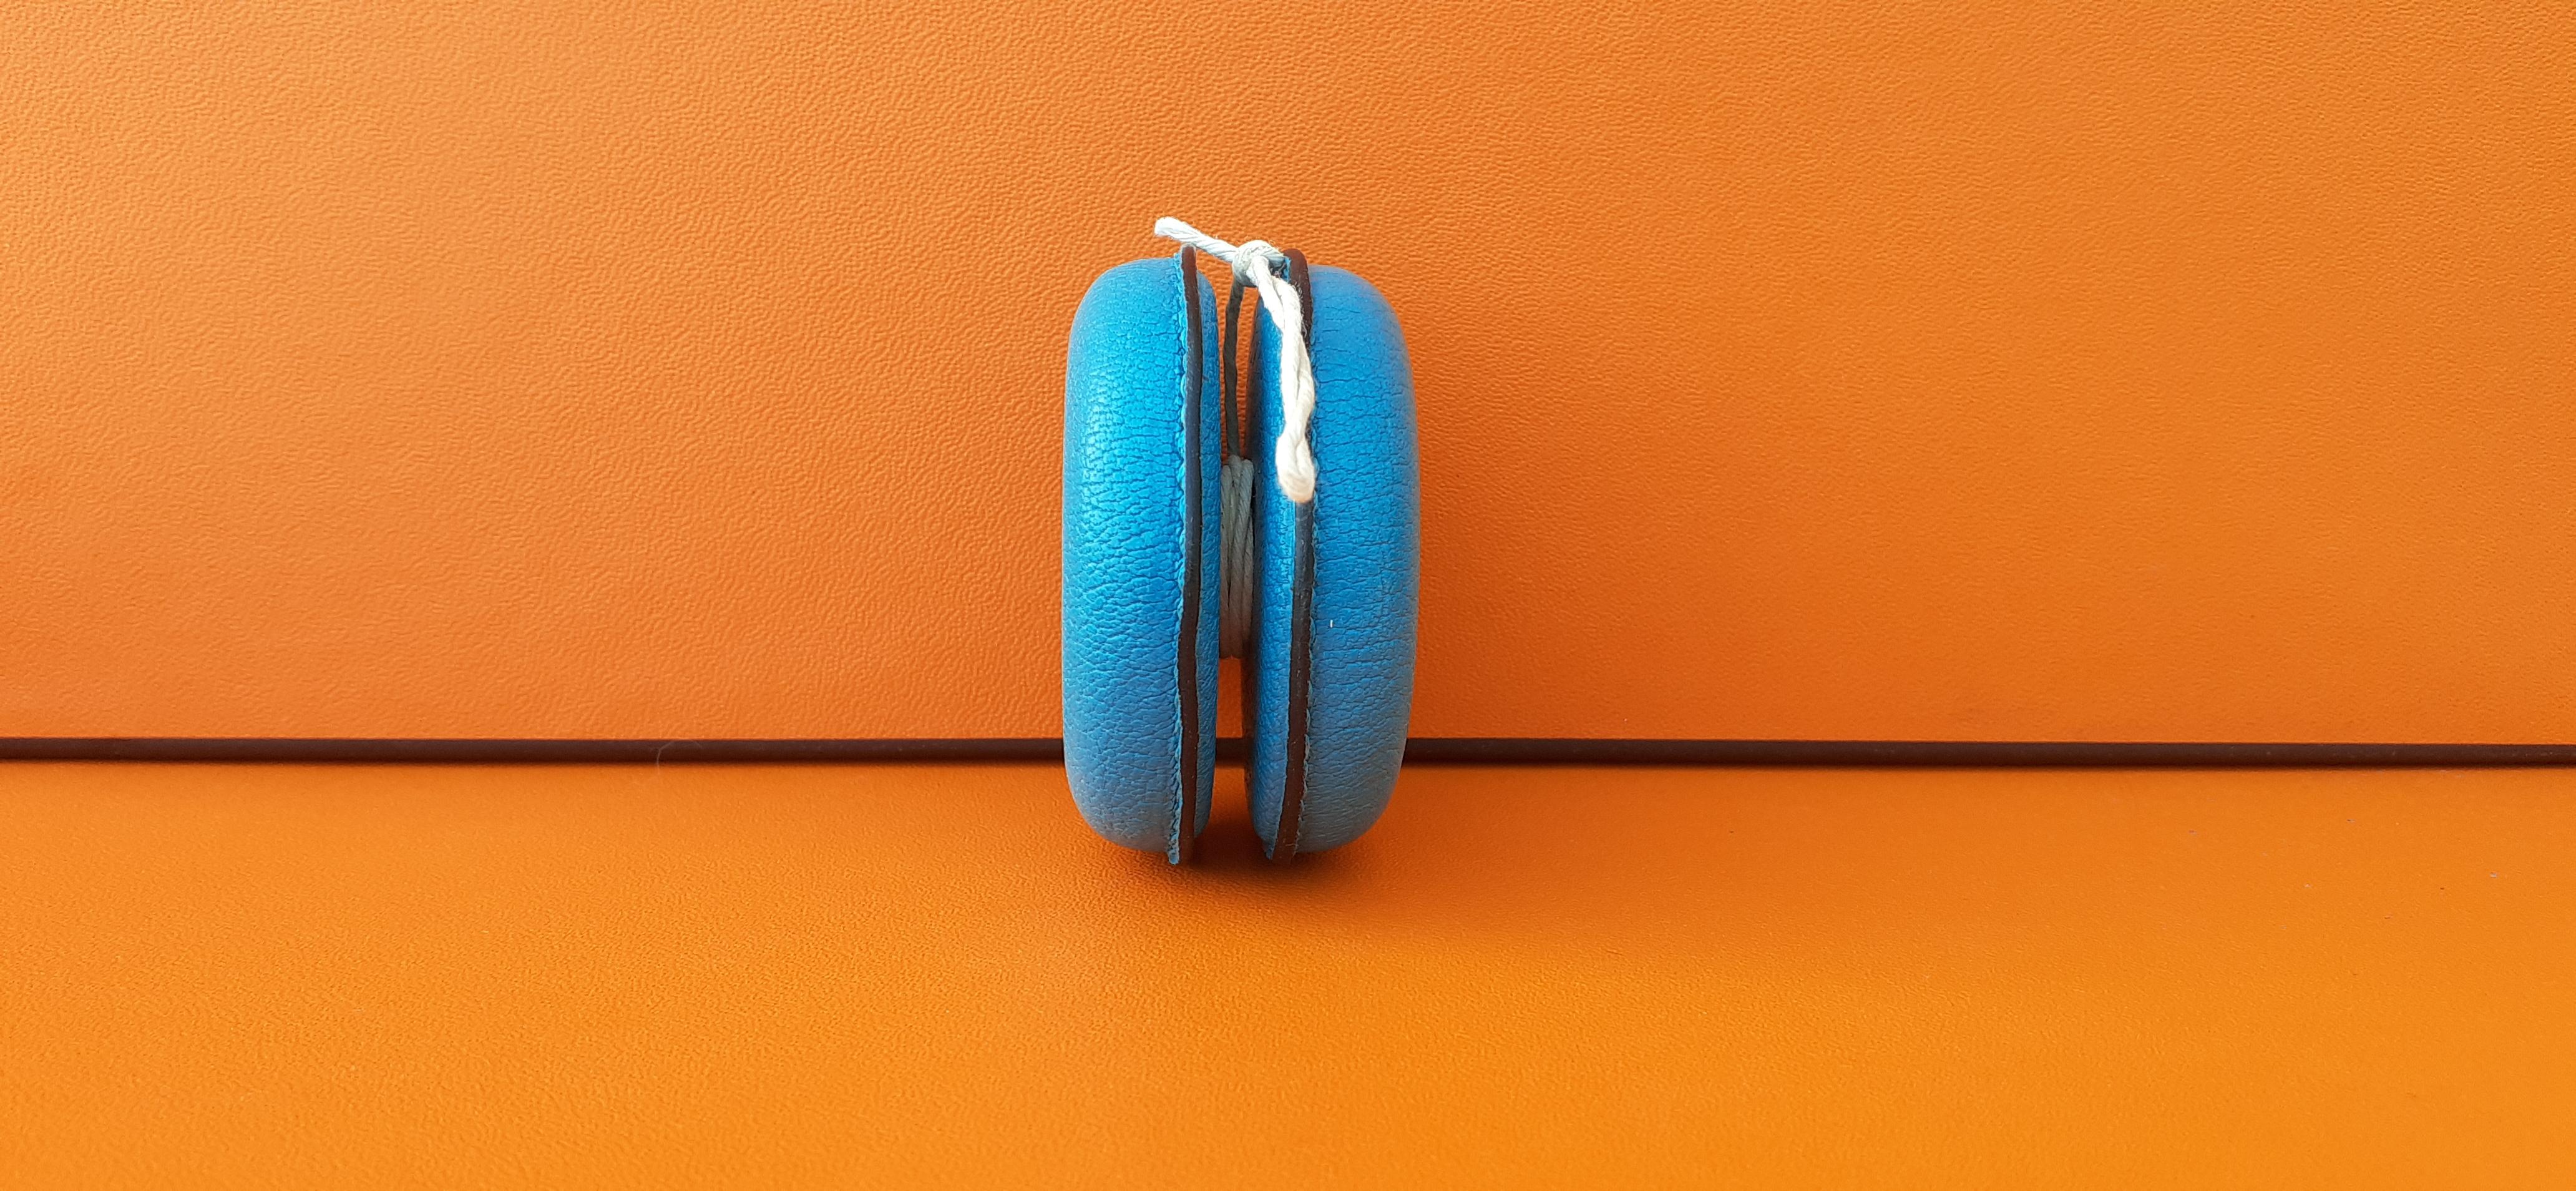 Rare Authentic Hermès Yoyo

Made of Grained Leather and White Rope

Colorway: Turquoise blue

